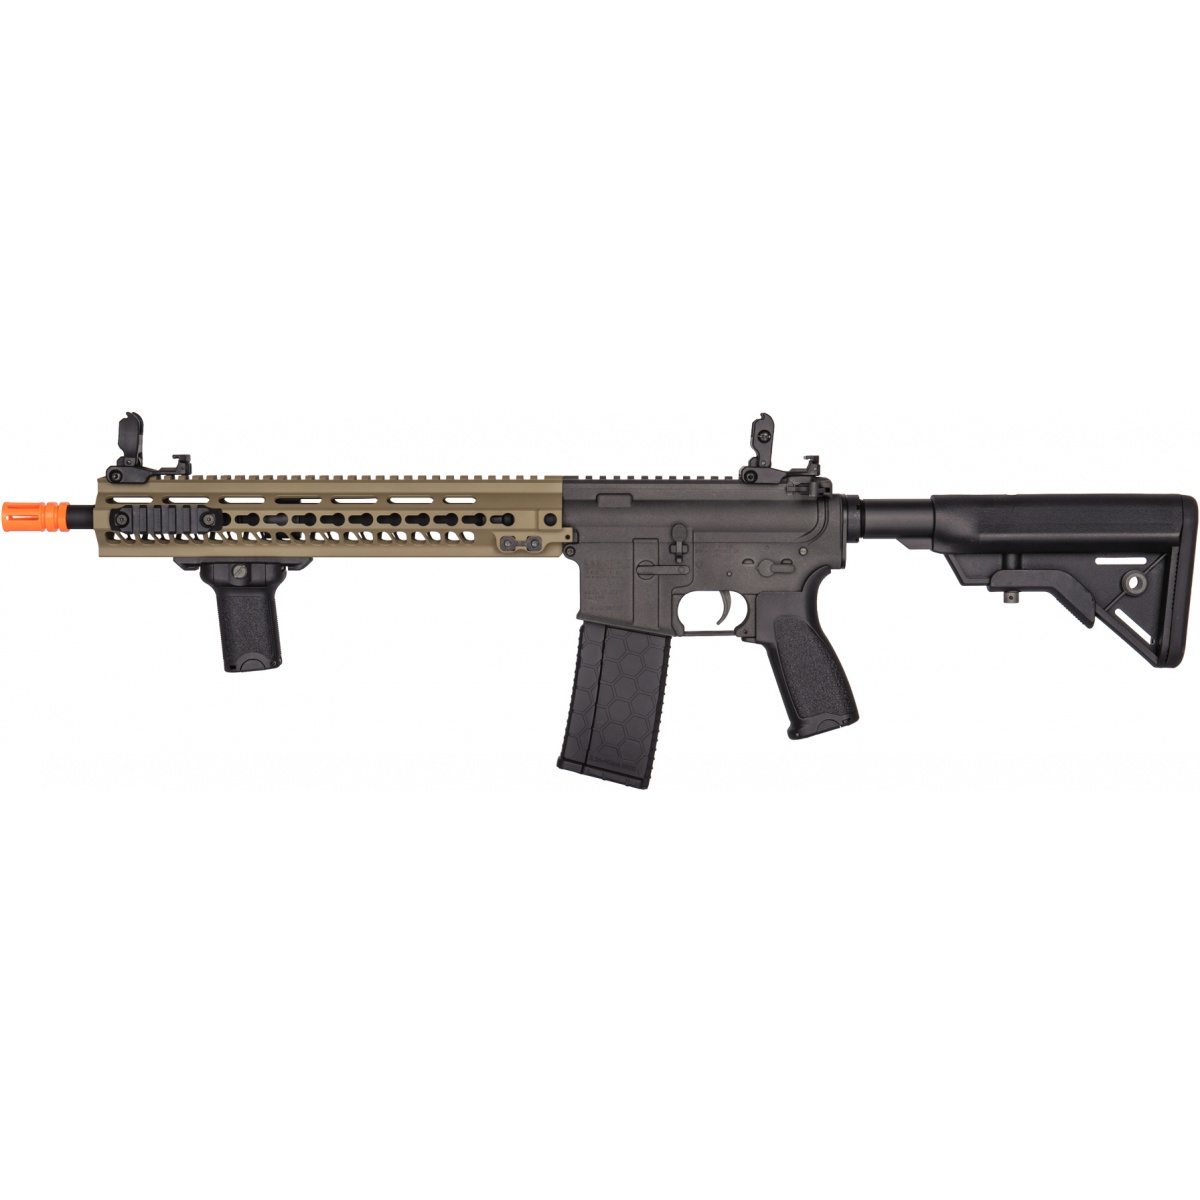  365 FPS Lightweight Durable Polymer AK-47 Tactical Airsoft  Spring Rifle - Black : Sports & Outdoors